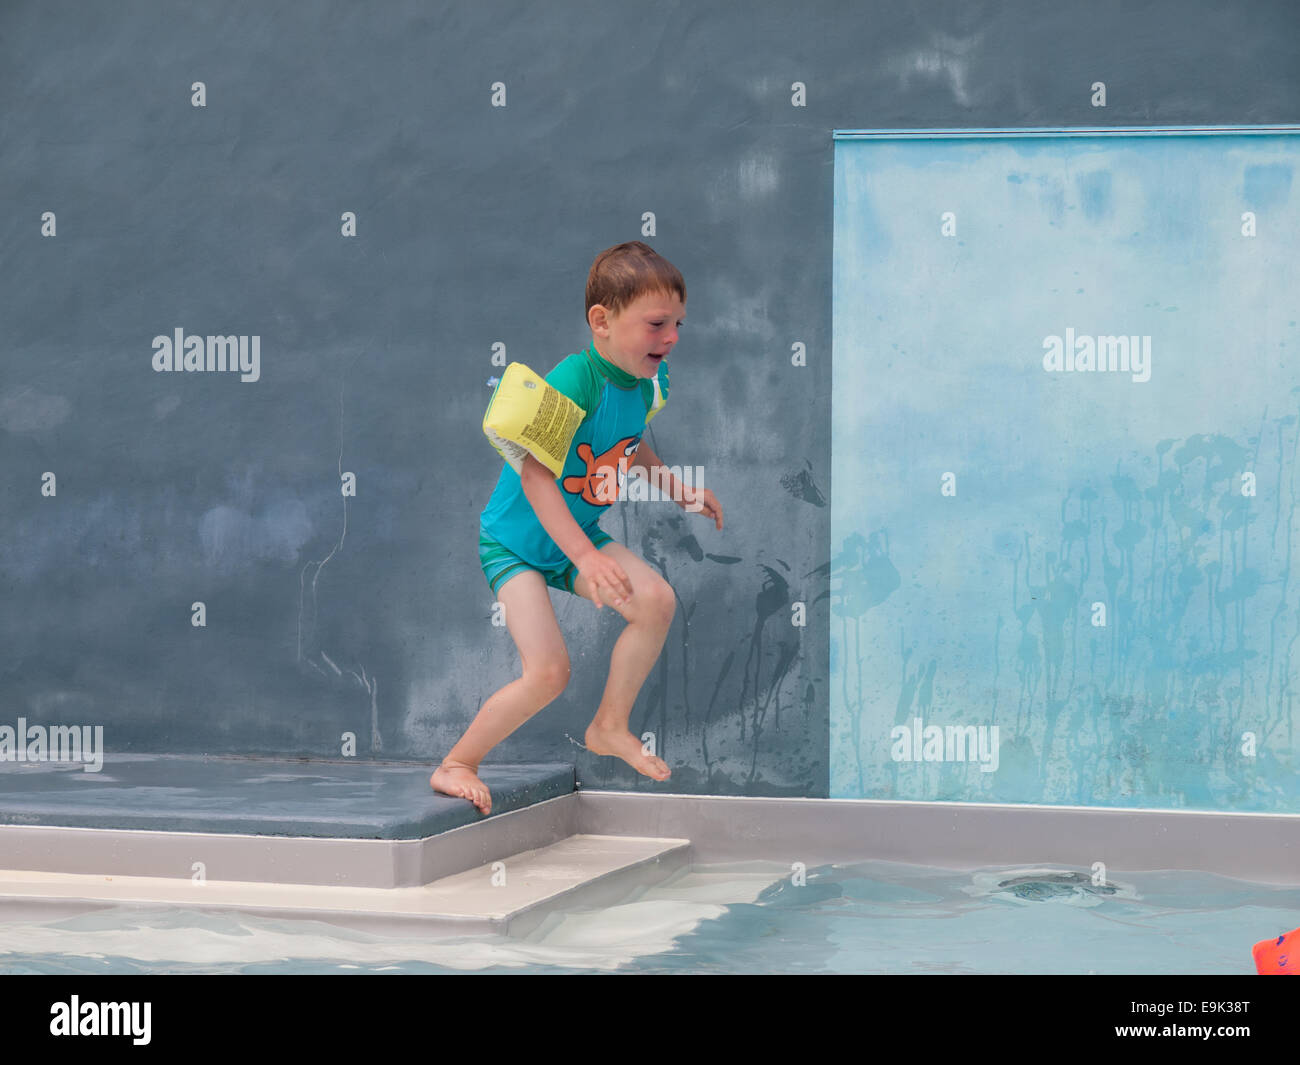 small boy in armbands jumping into an outdoor swimming pool Stock Photo